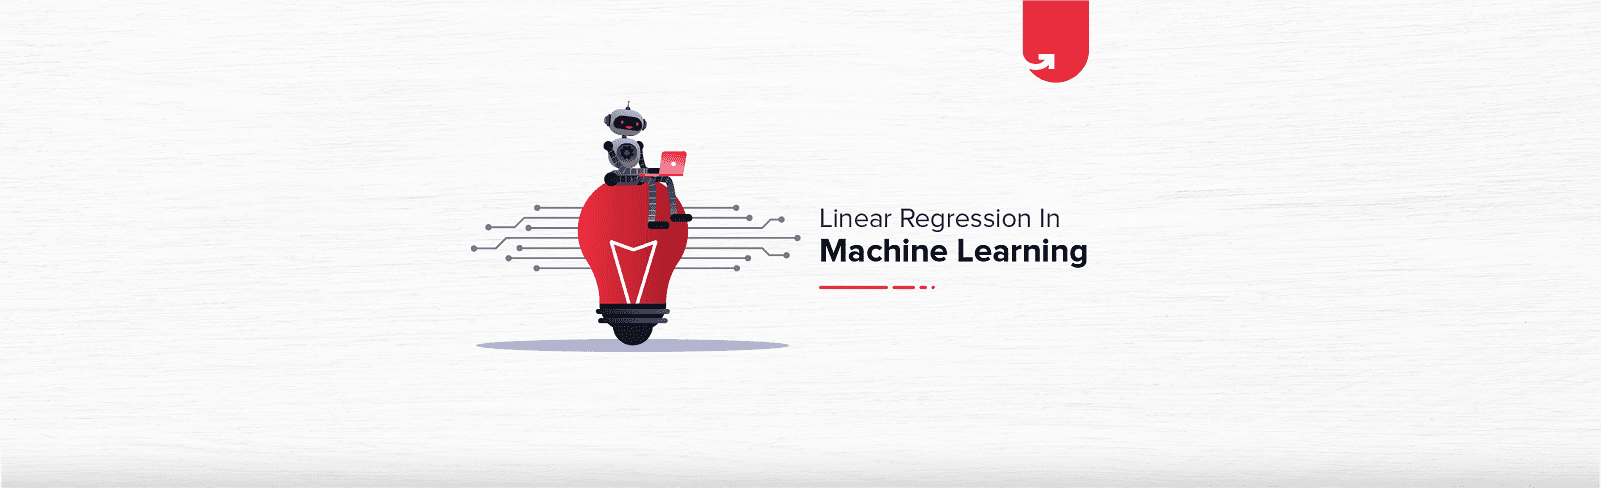 Linear Regression in Machine Learning: Everything You Need to Know